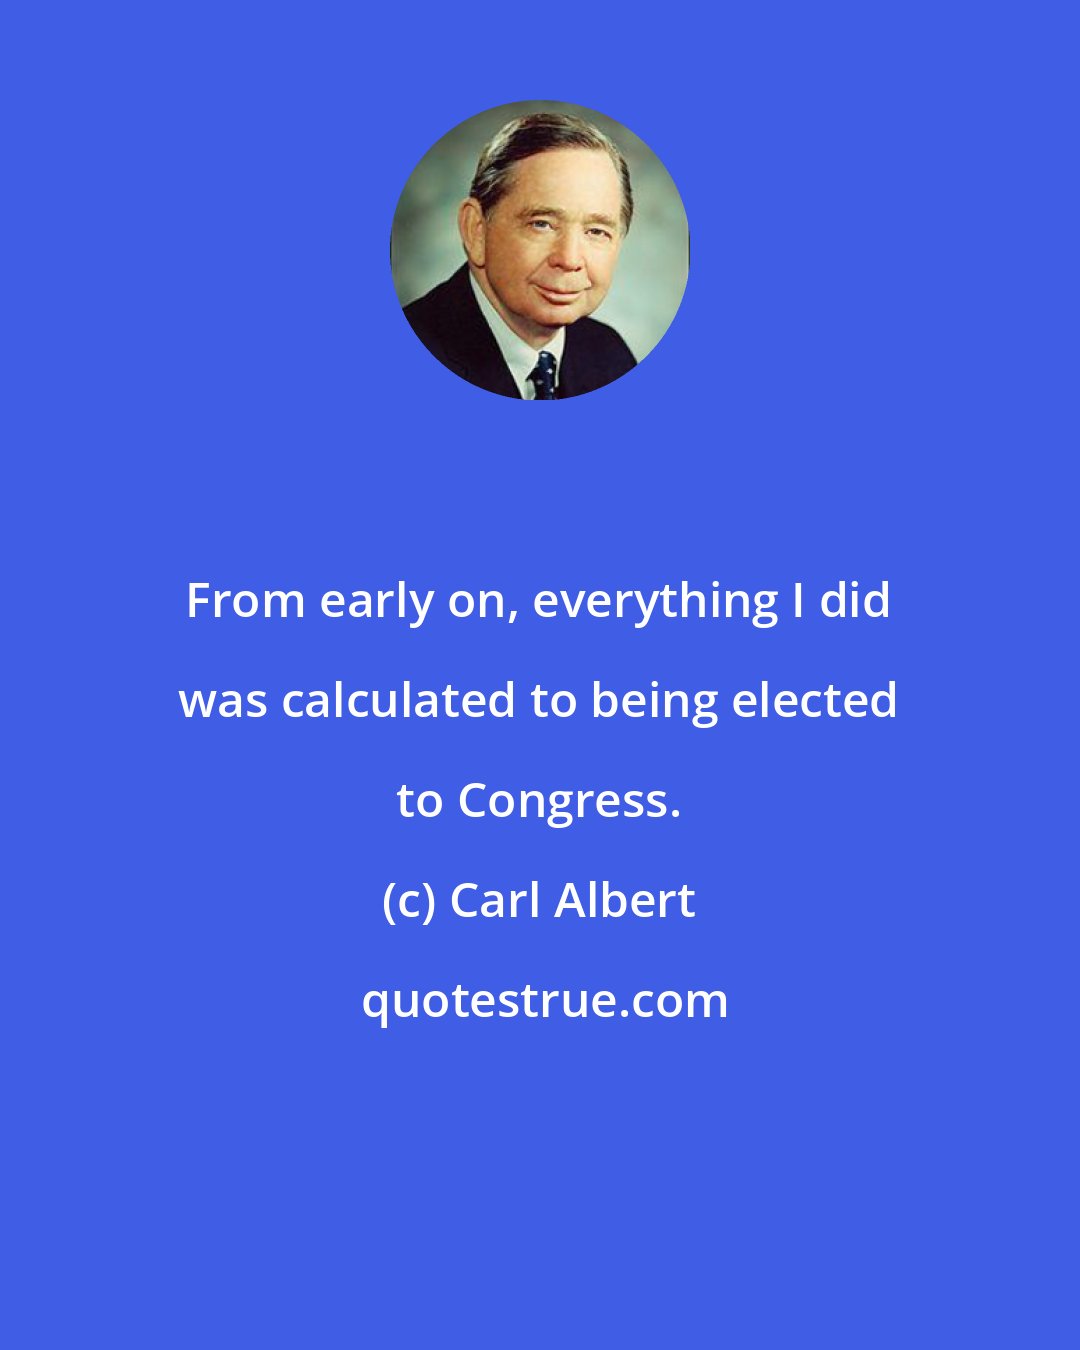 Carl Albert: From early on, everything I did was calculated to being elected to Congress.